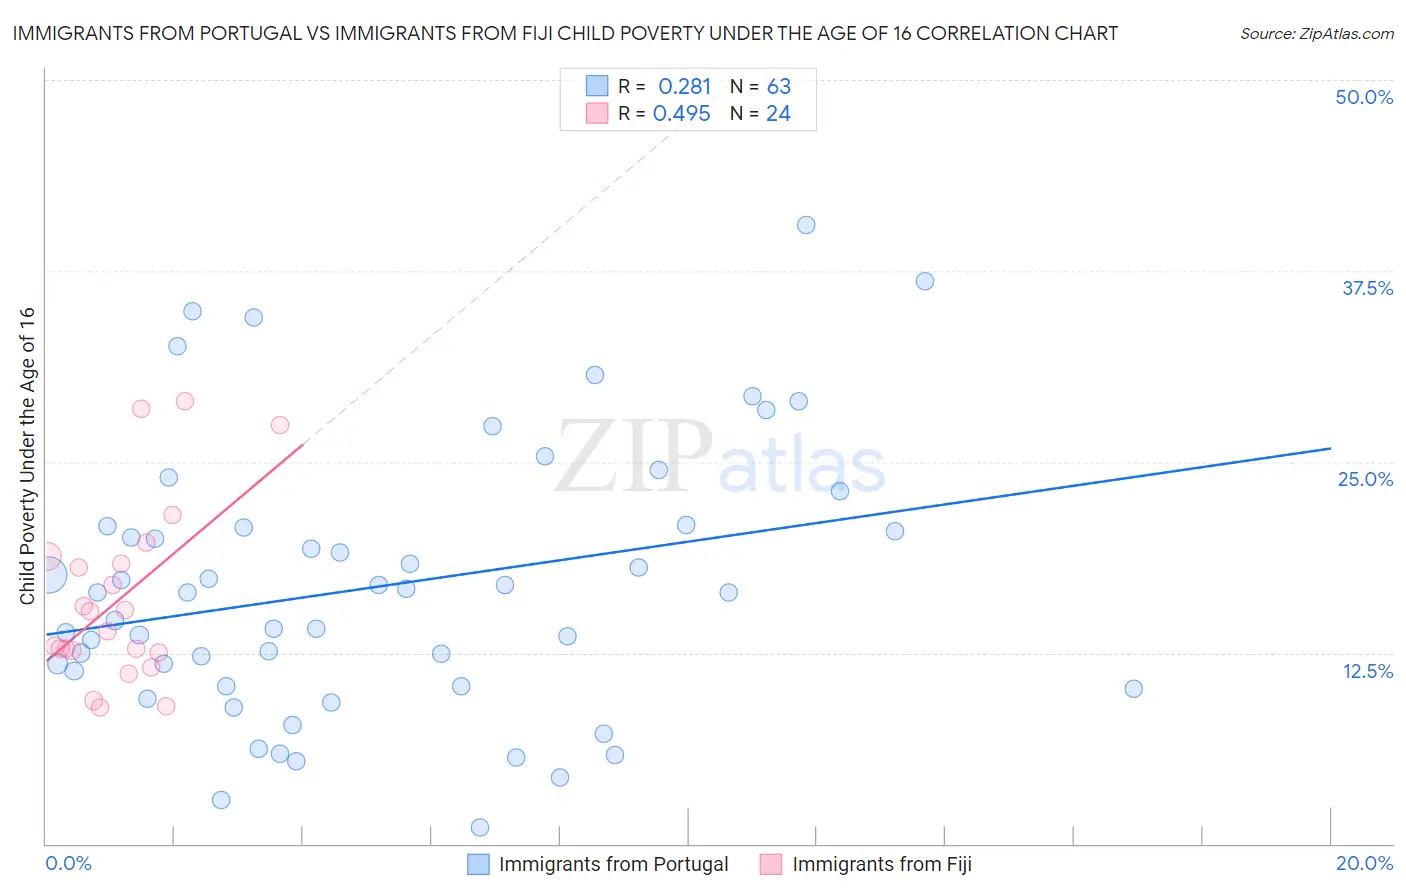 Immigrants from Portugal vs Immigrants from Fiji Child Poverty Under the Age of 16